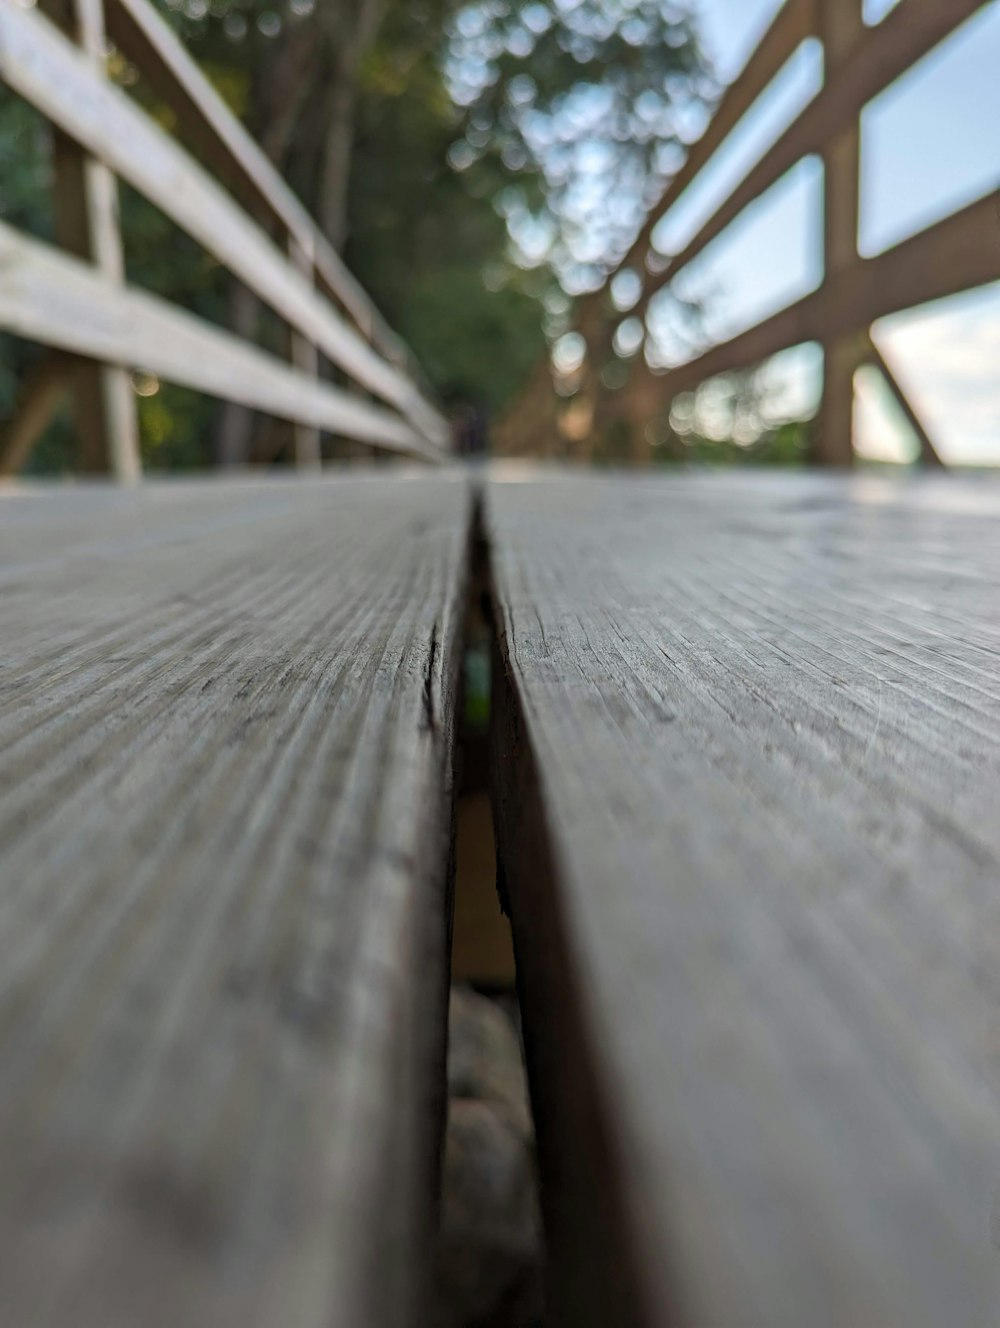 a close up of a wooden bench with trees in the background